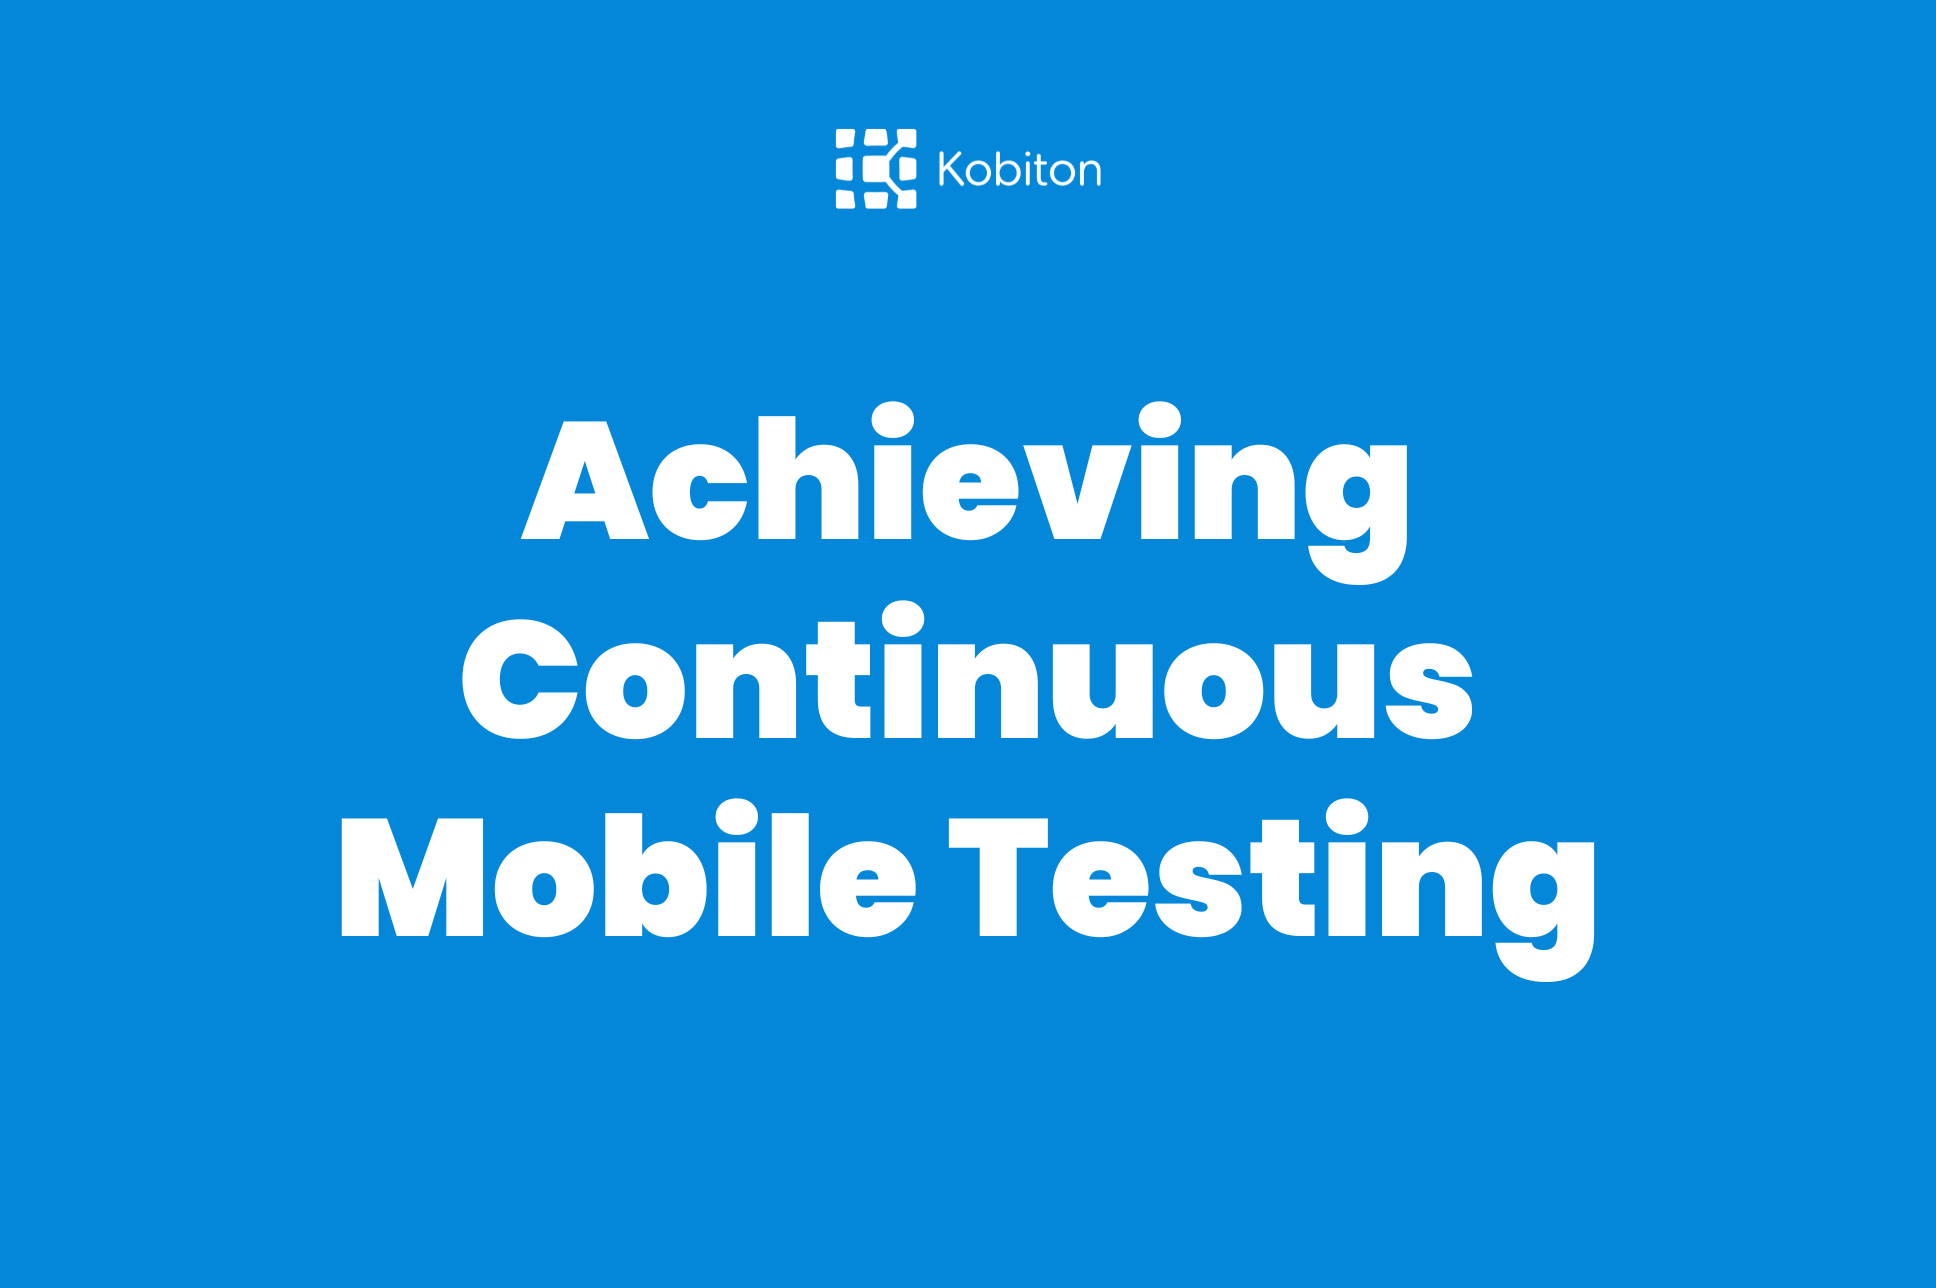 Achieving continuous mobile testing